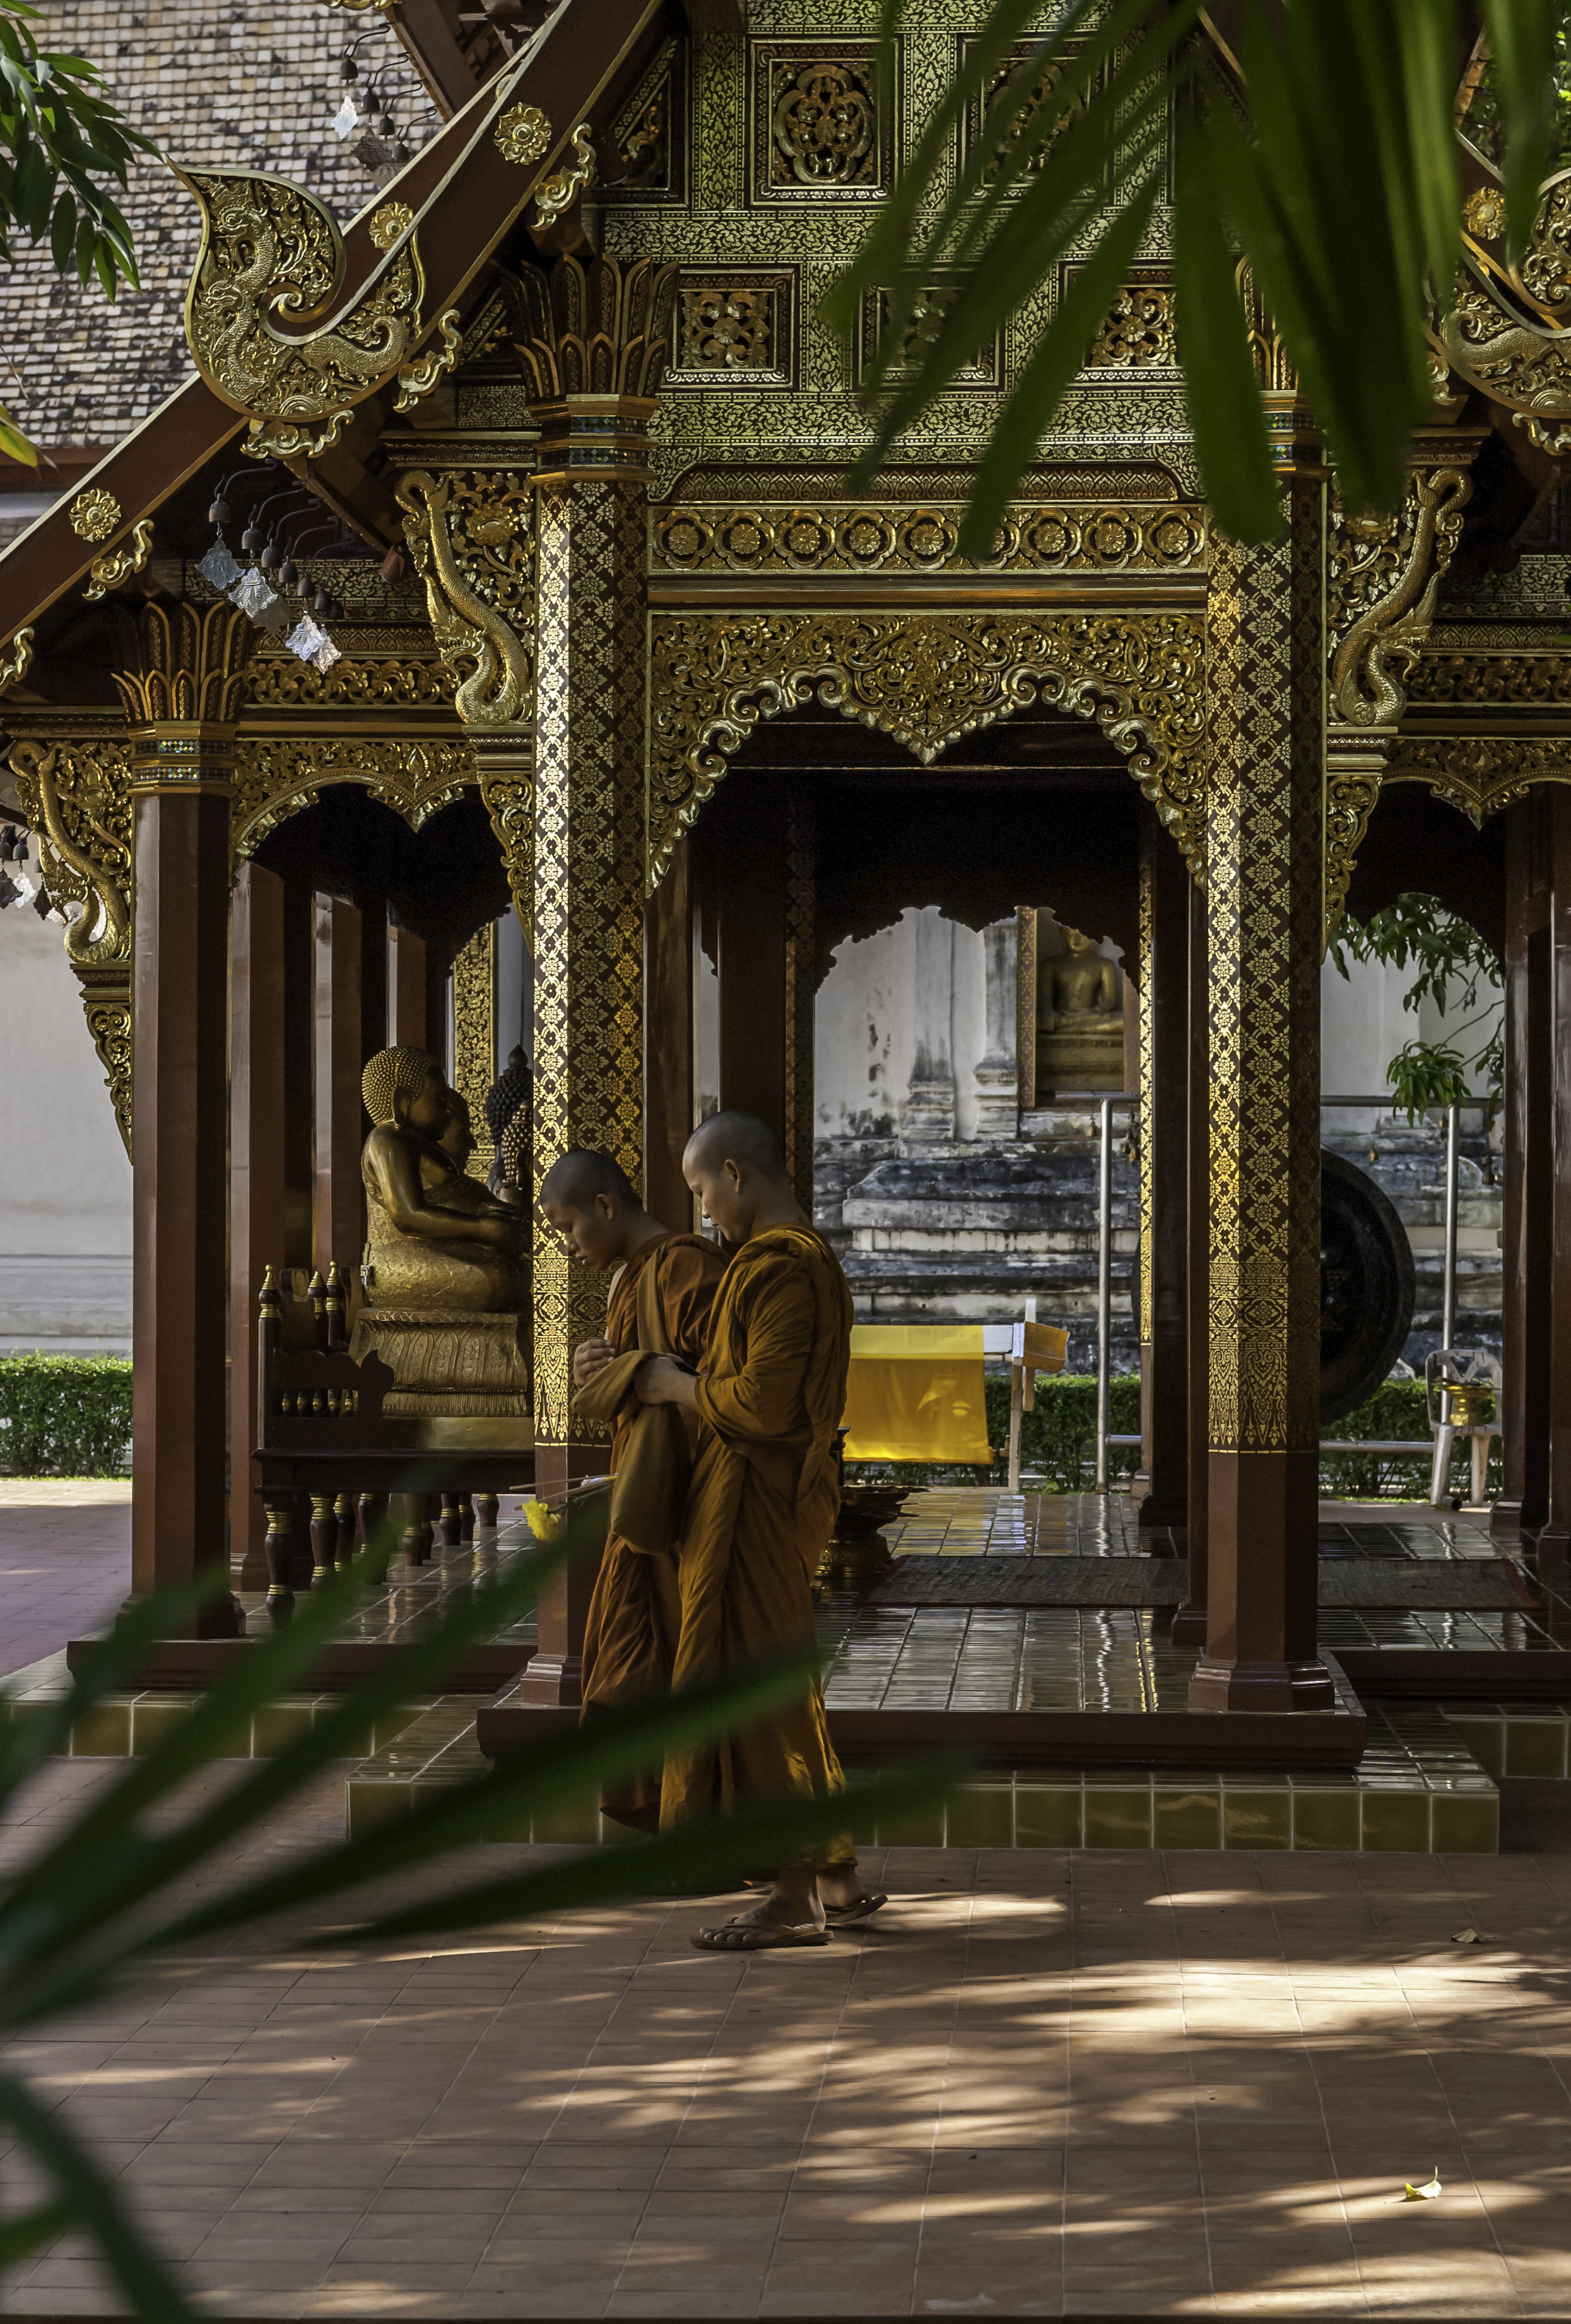 Buddhist Monks in a Temple in Chiang Mai